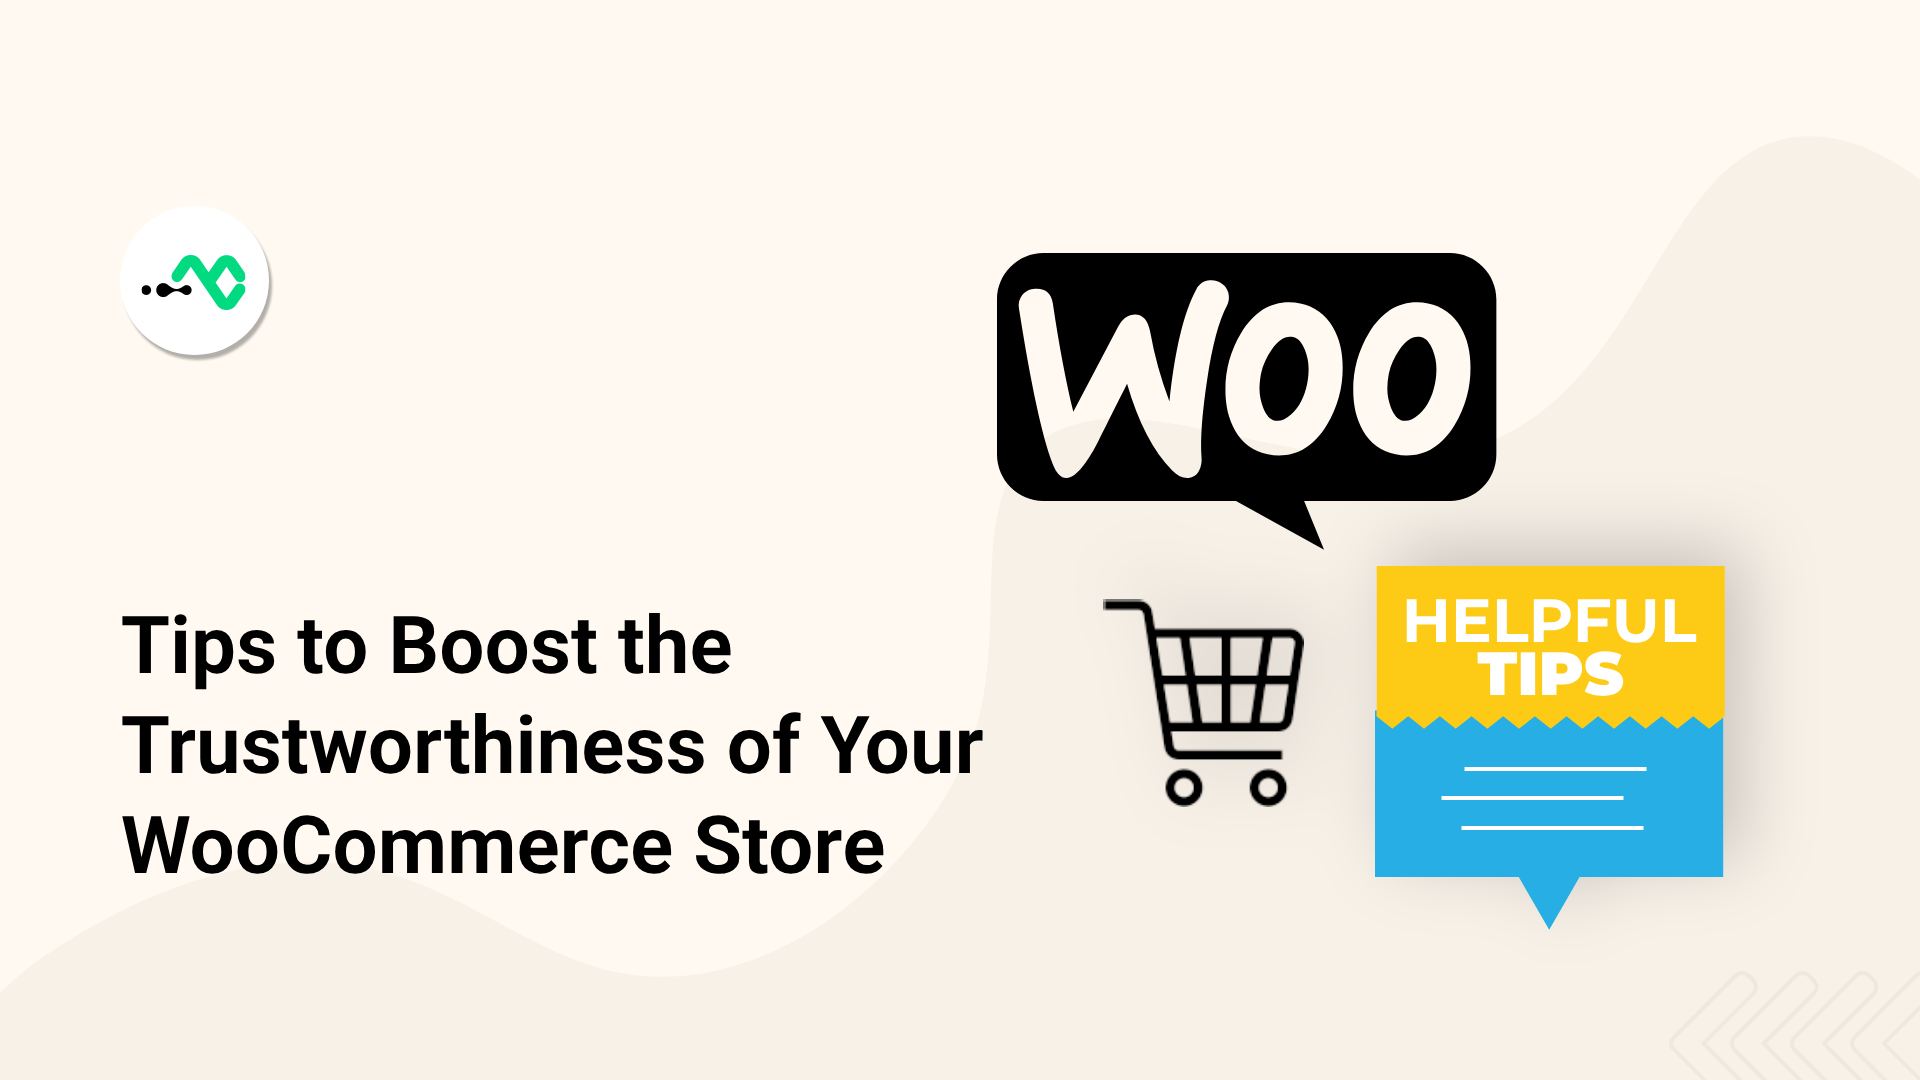 How to Make a WooCommerce Store More Trustworthy